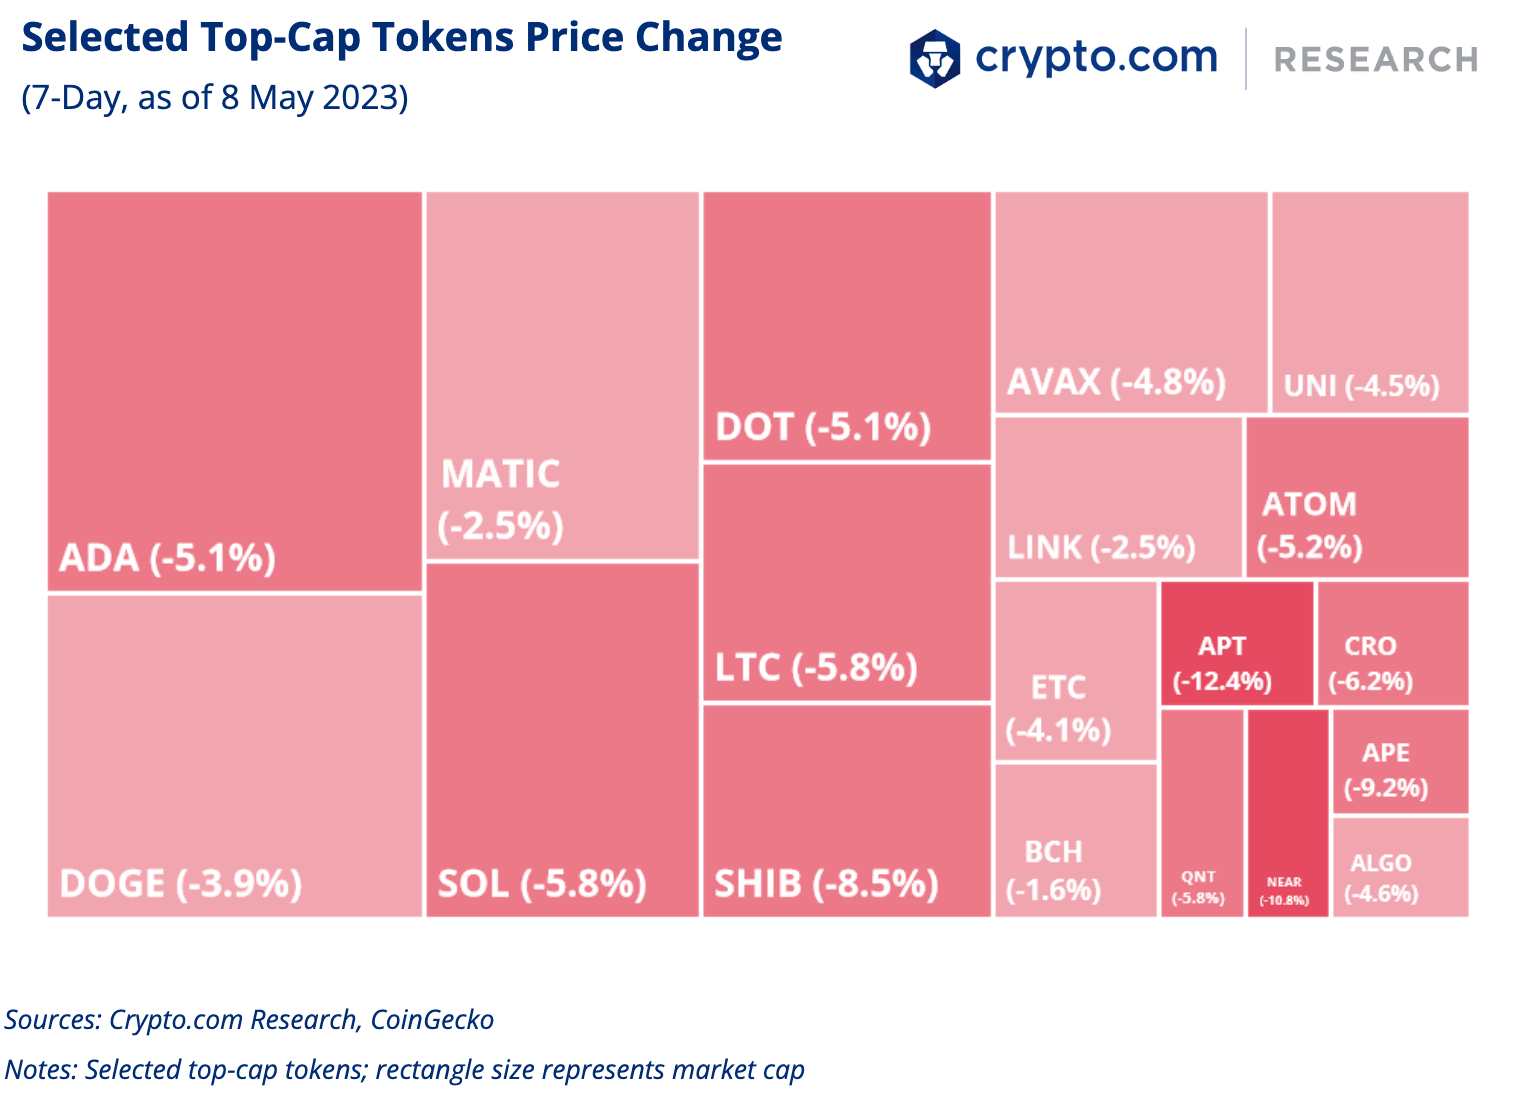 Selected Top Cap Tokens Price Change 8 May